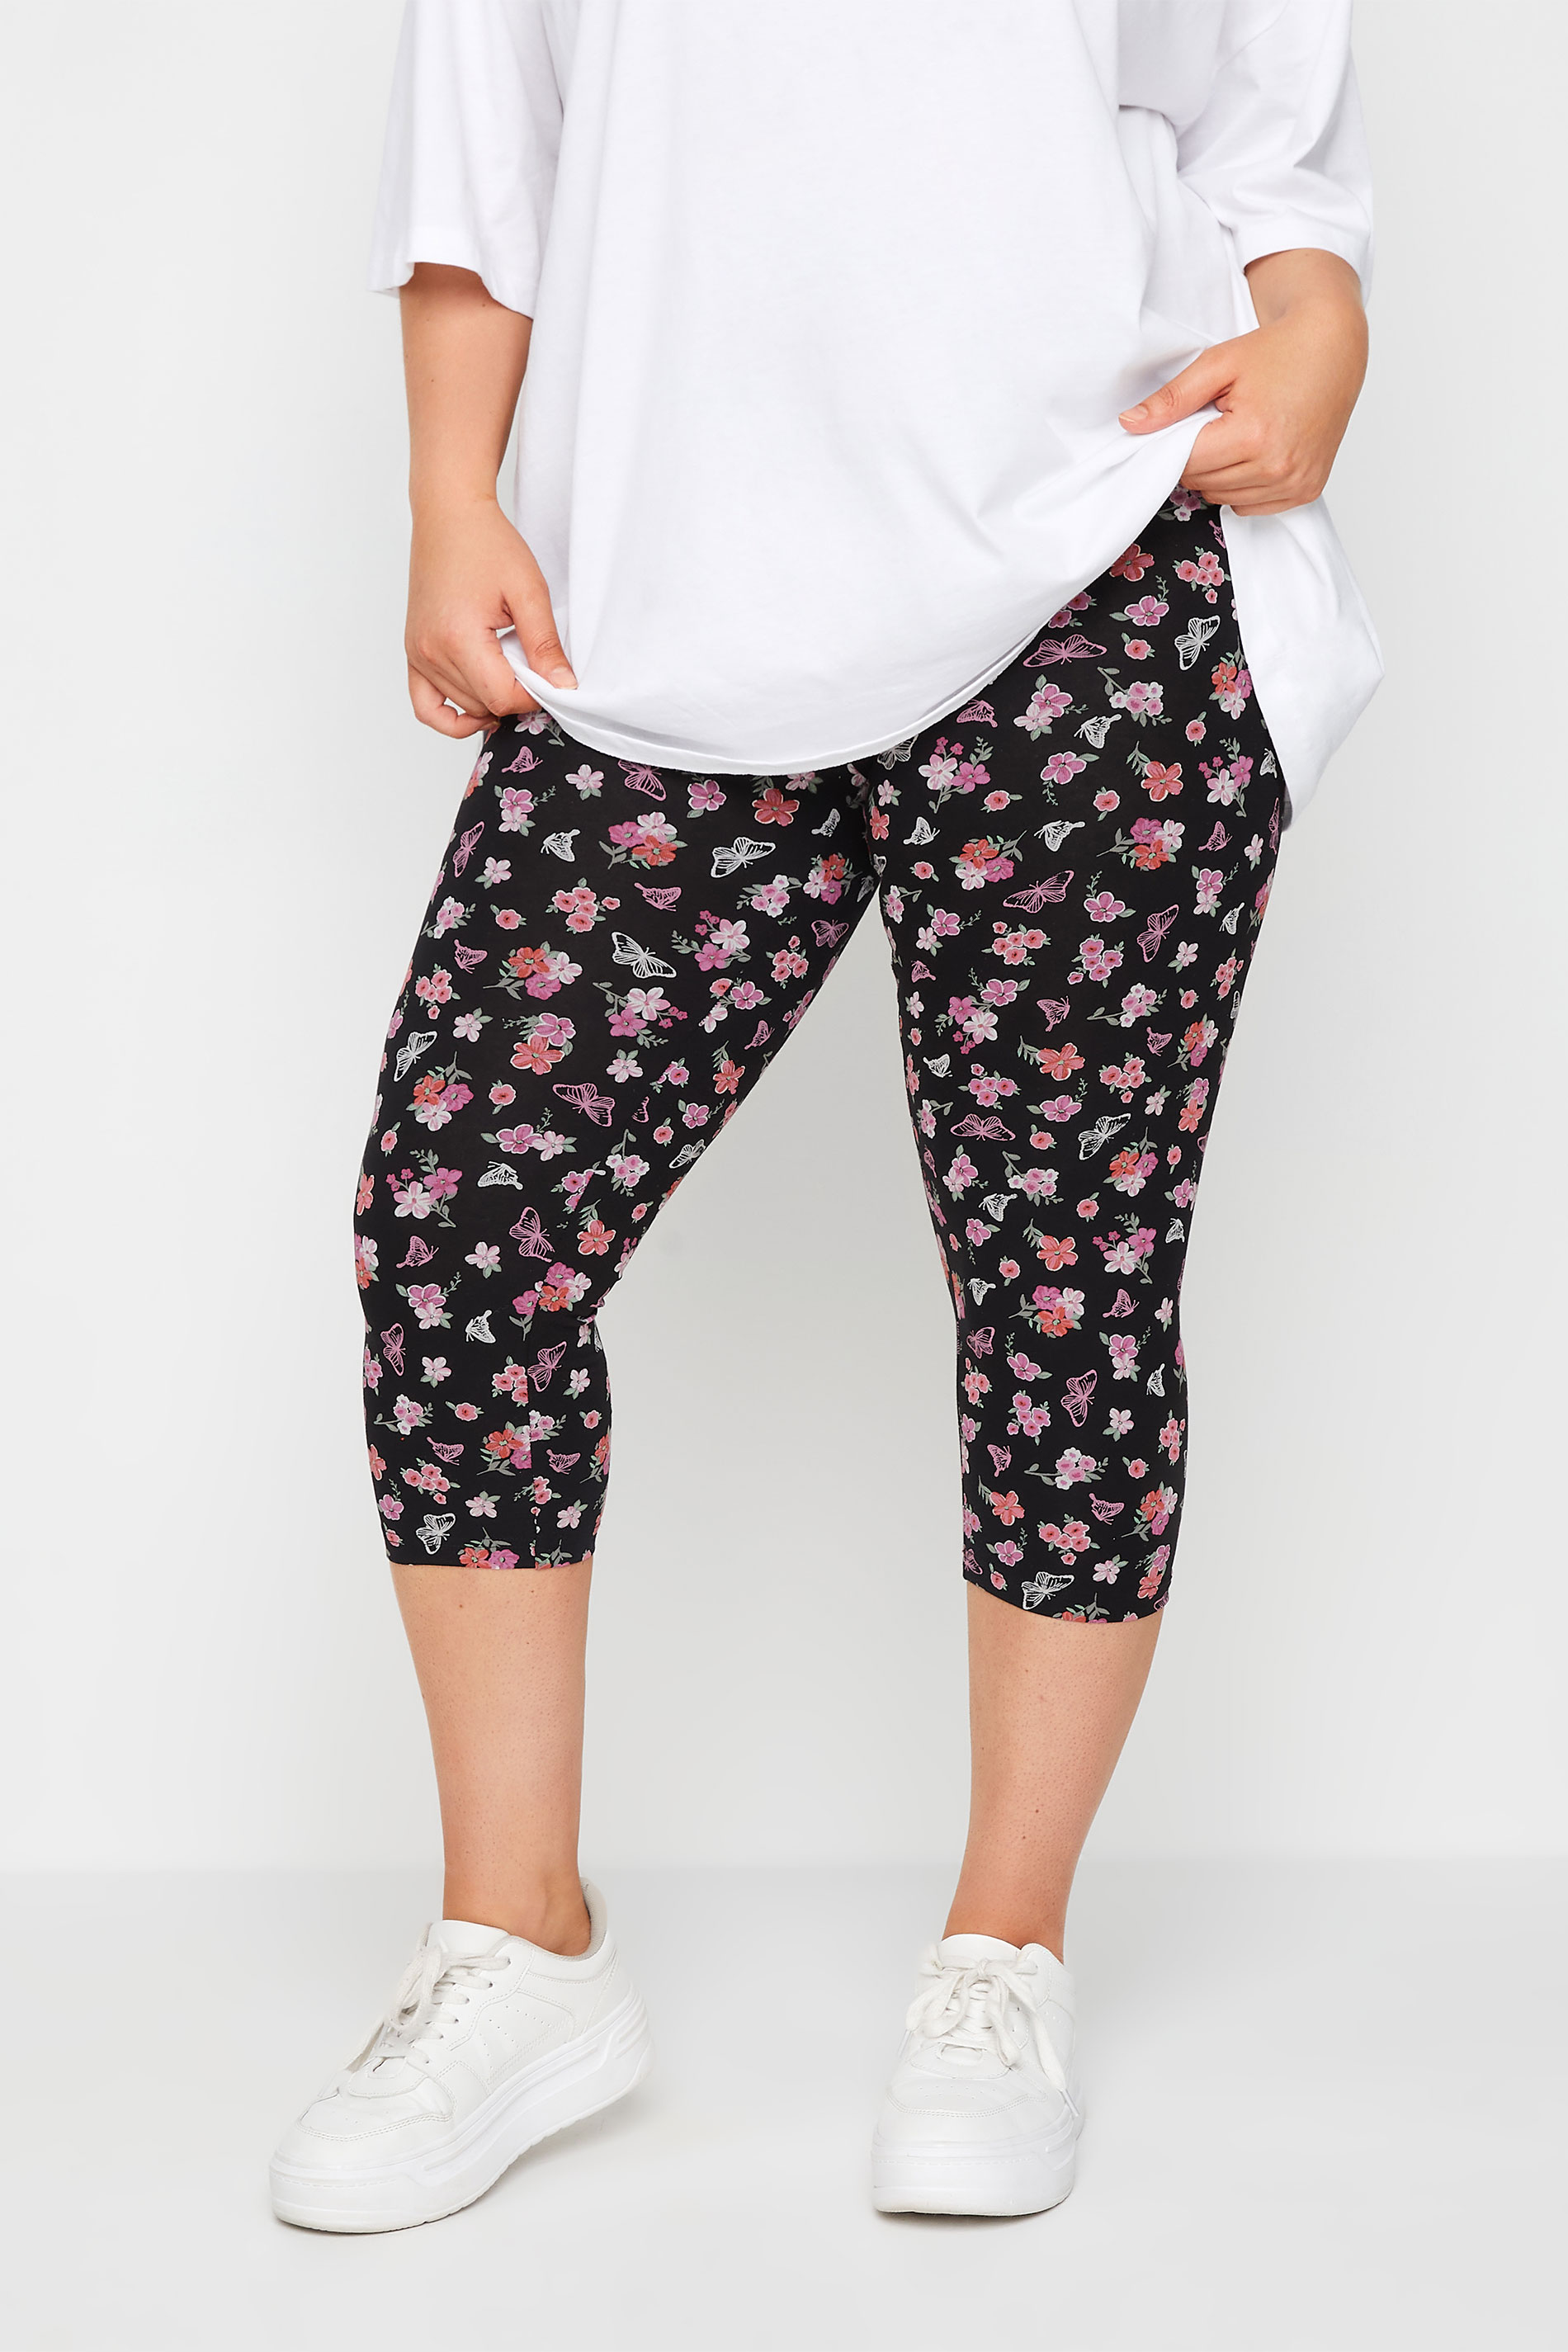 YOURS Plus Size 2 PACK Black Butterfly Print Cropped Leggings | Yours Clothing 2